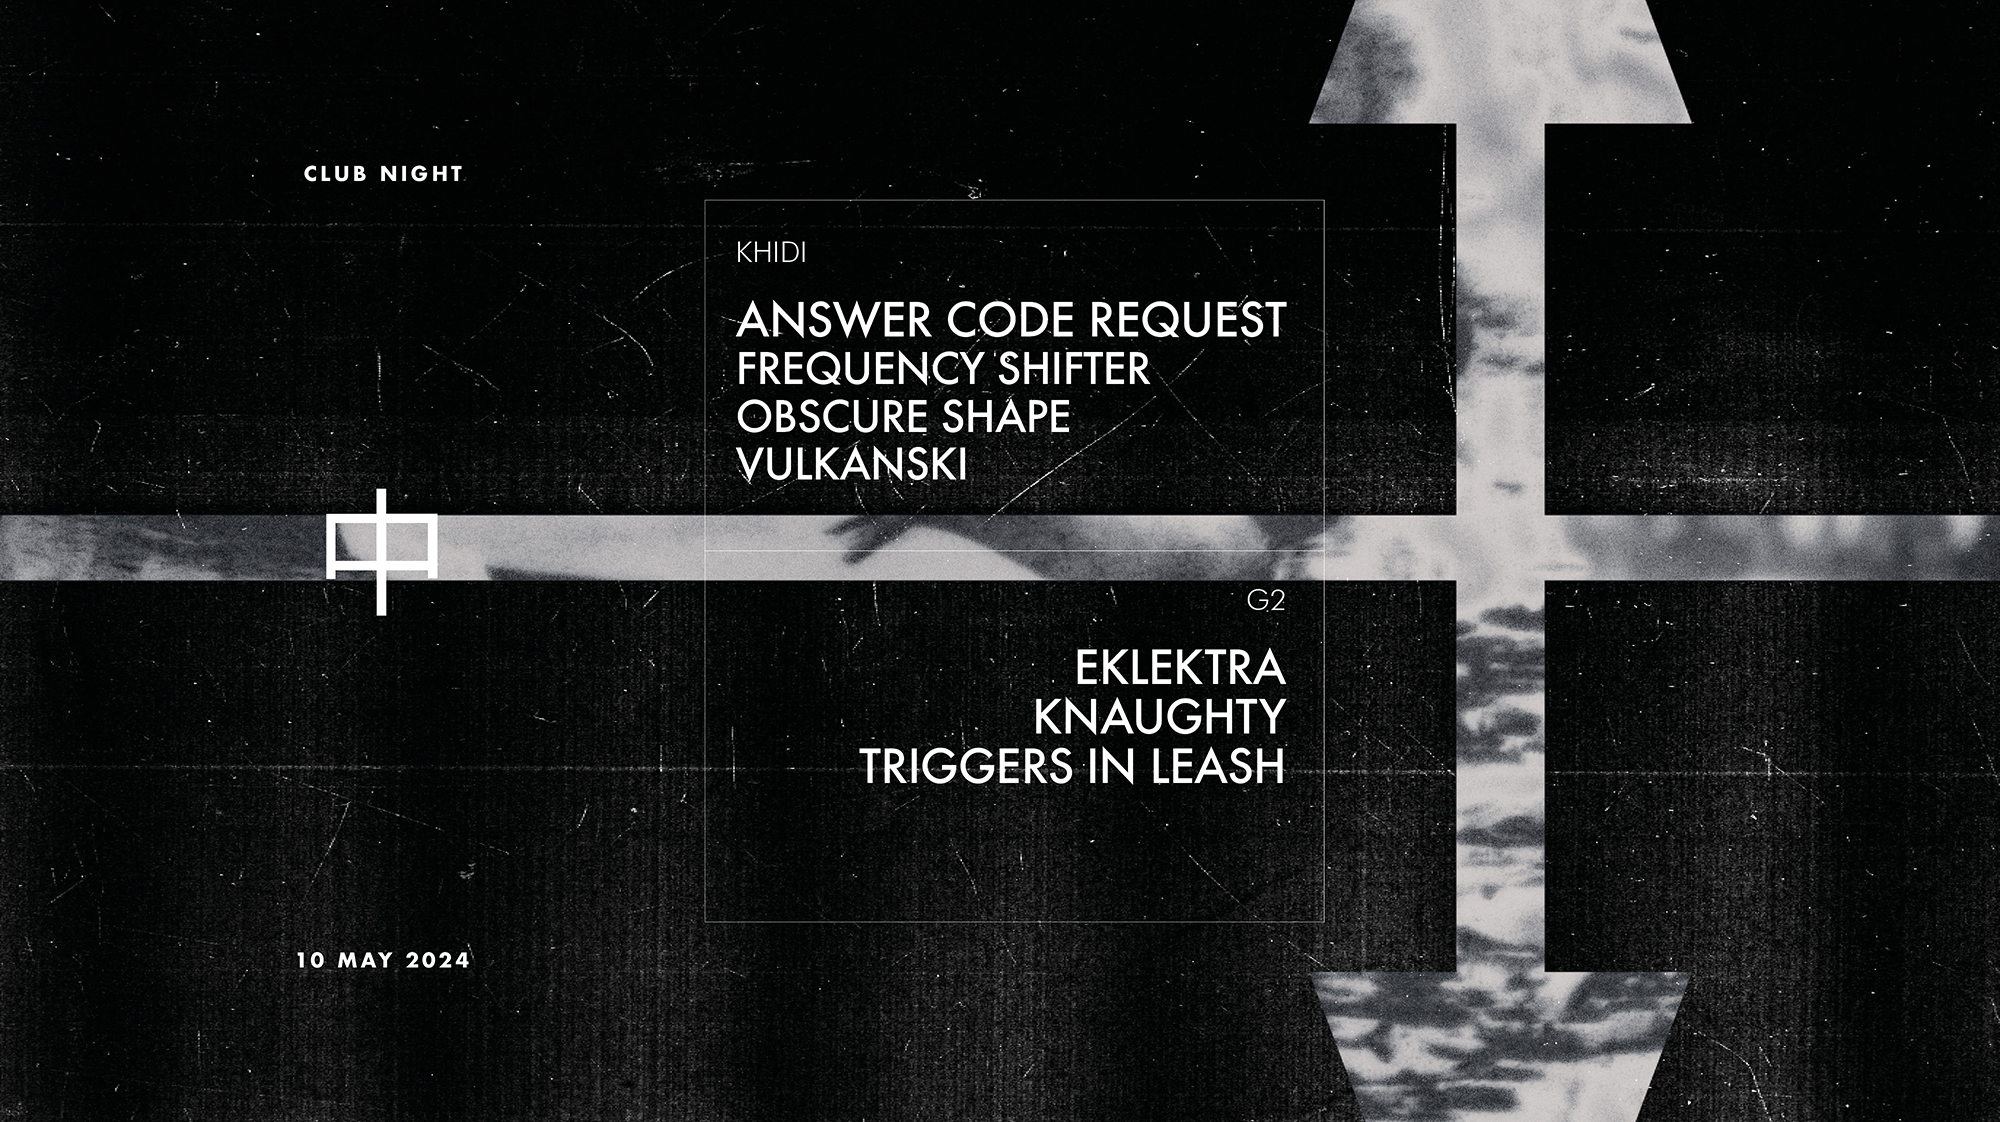 KHIDI 中 Answer Code Request ❚ Frequency Shifter ❚ Obscure Shape ❚ Vulkanski ❚ Knaughty - Página frontal